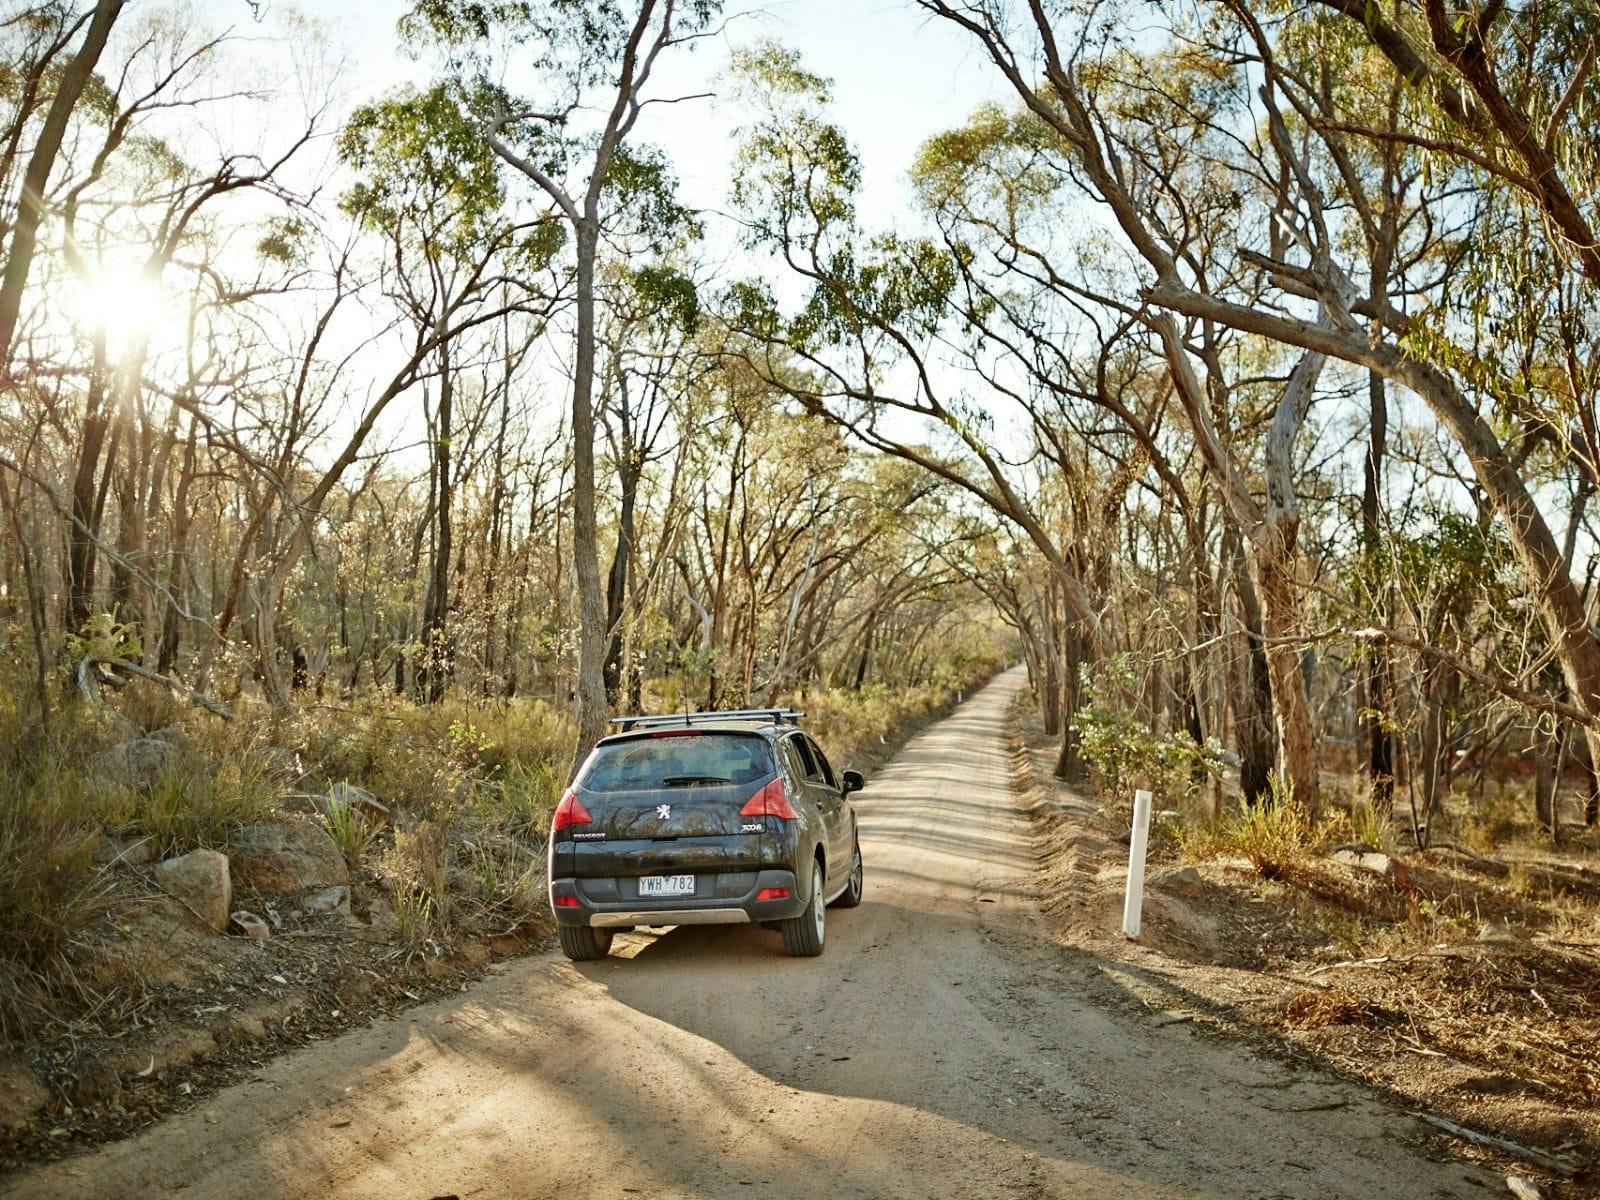 Car on road, surrounded by trees, rocks, native grasses, sunny day.